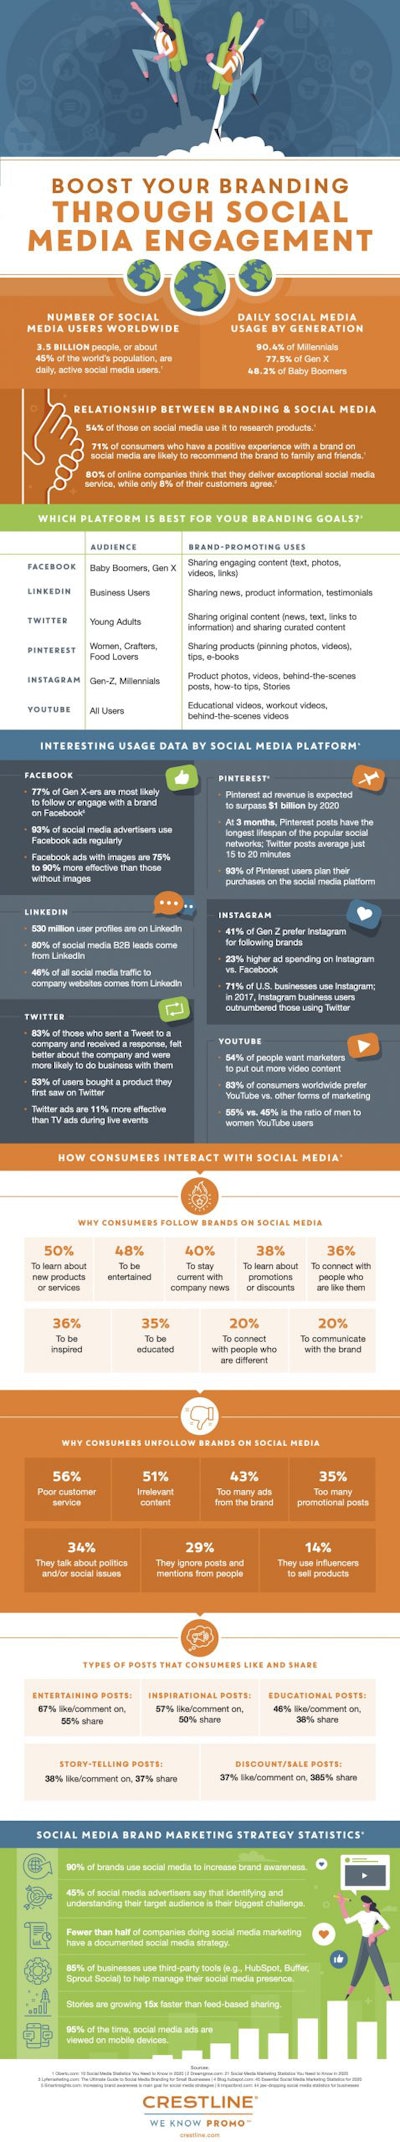 Boost your branding through social media engagement infographic by Crestline